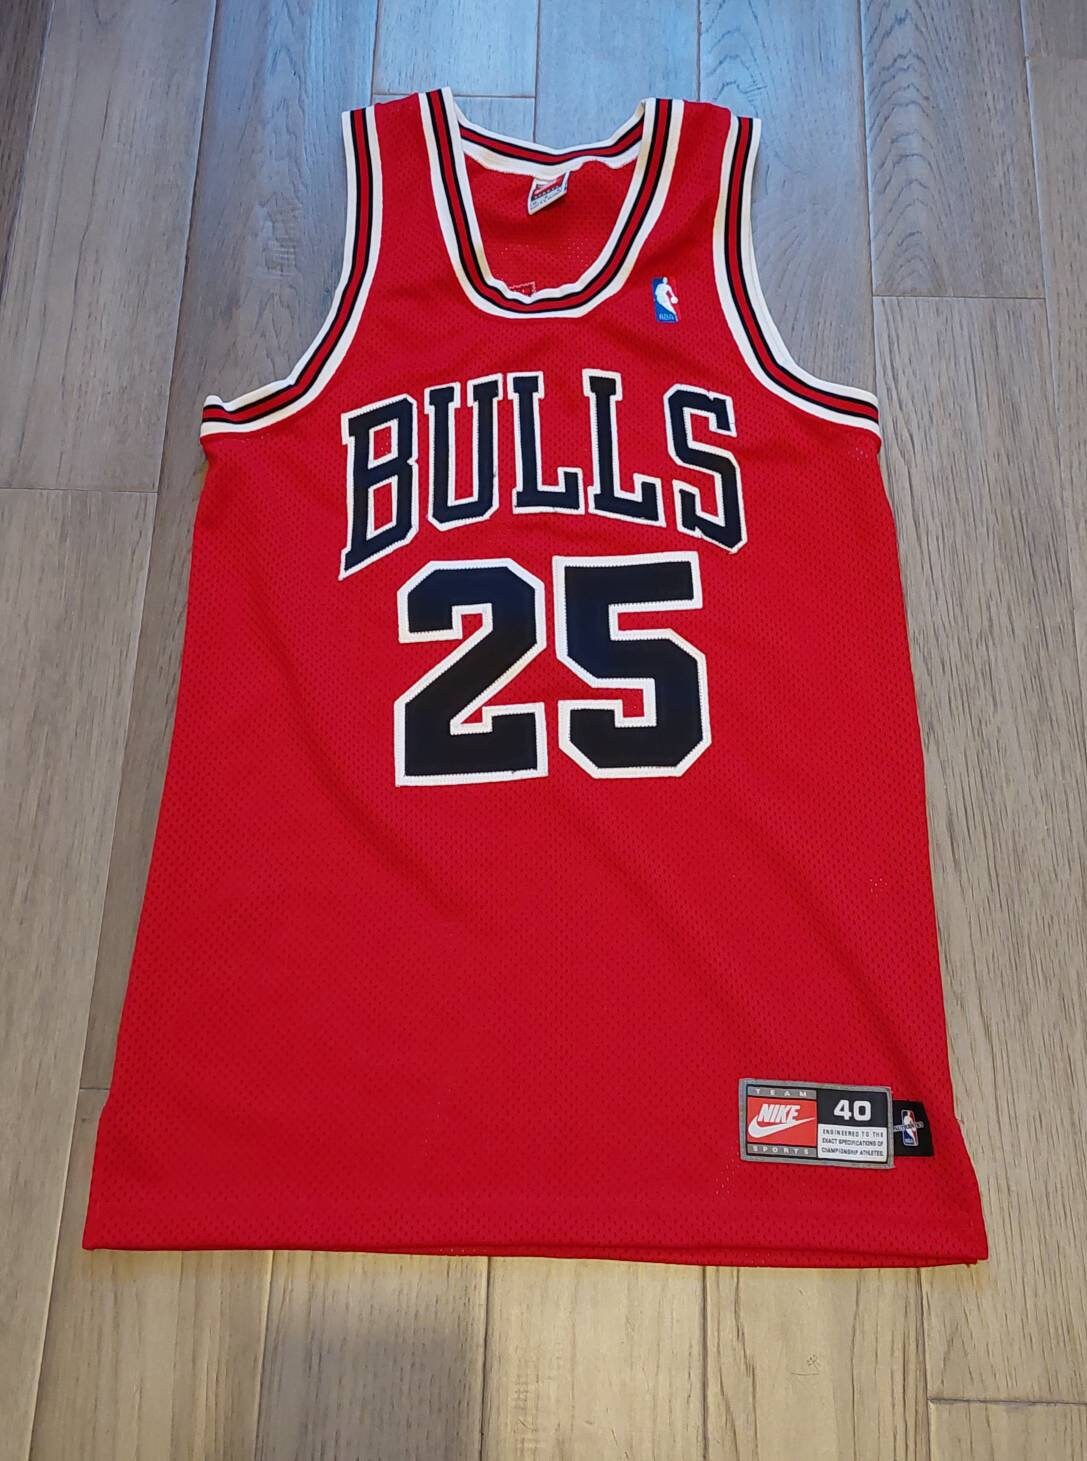 Hall of Bulls” Authentic Jersey – Art of Chuck Styles